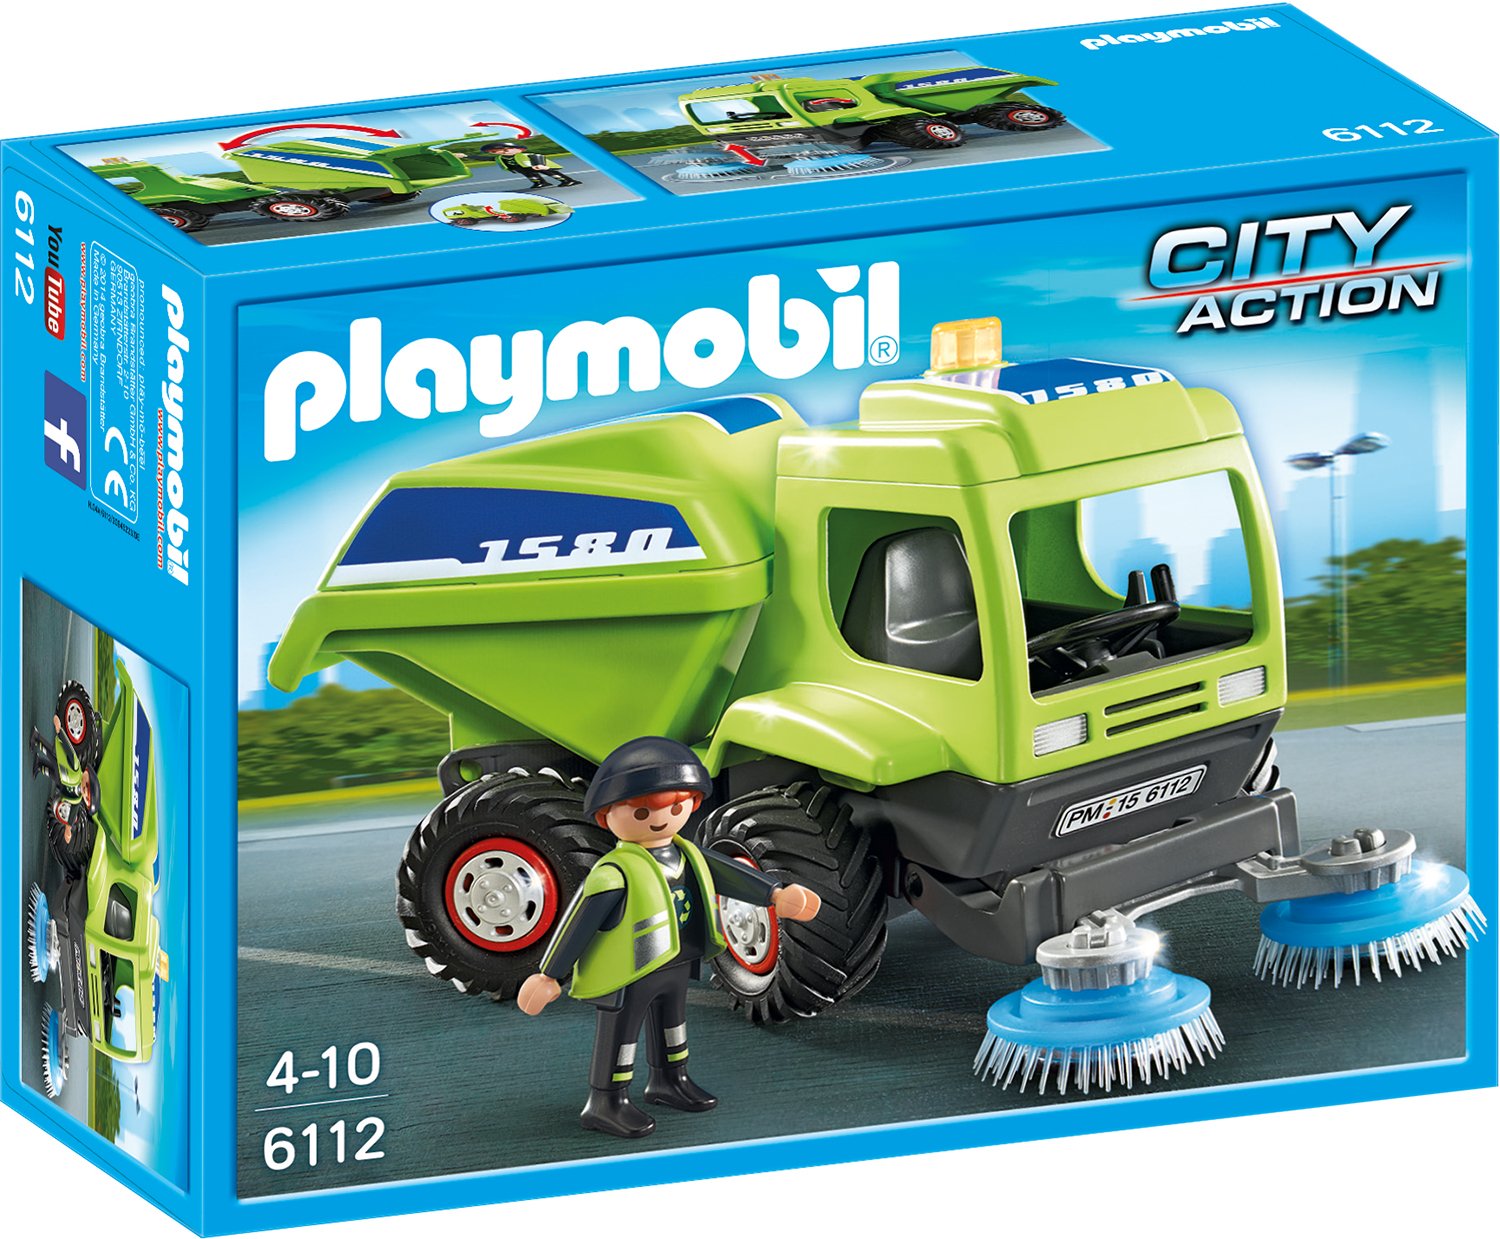 Playmobil City Action City Cleaning Street Cleaner